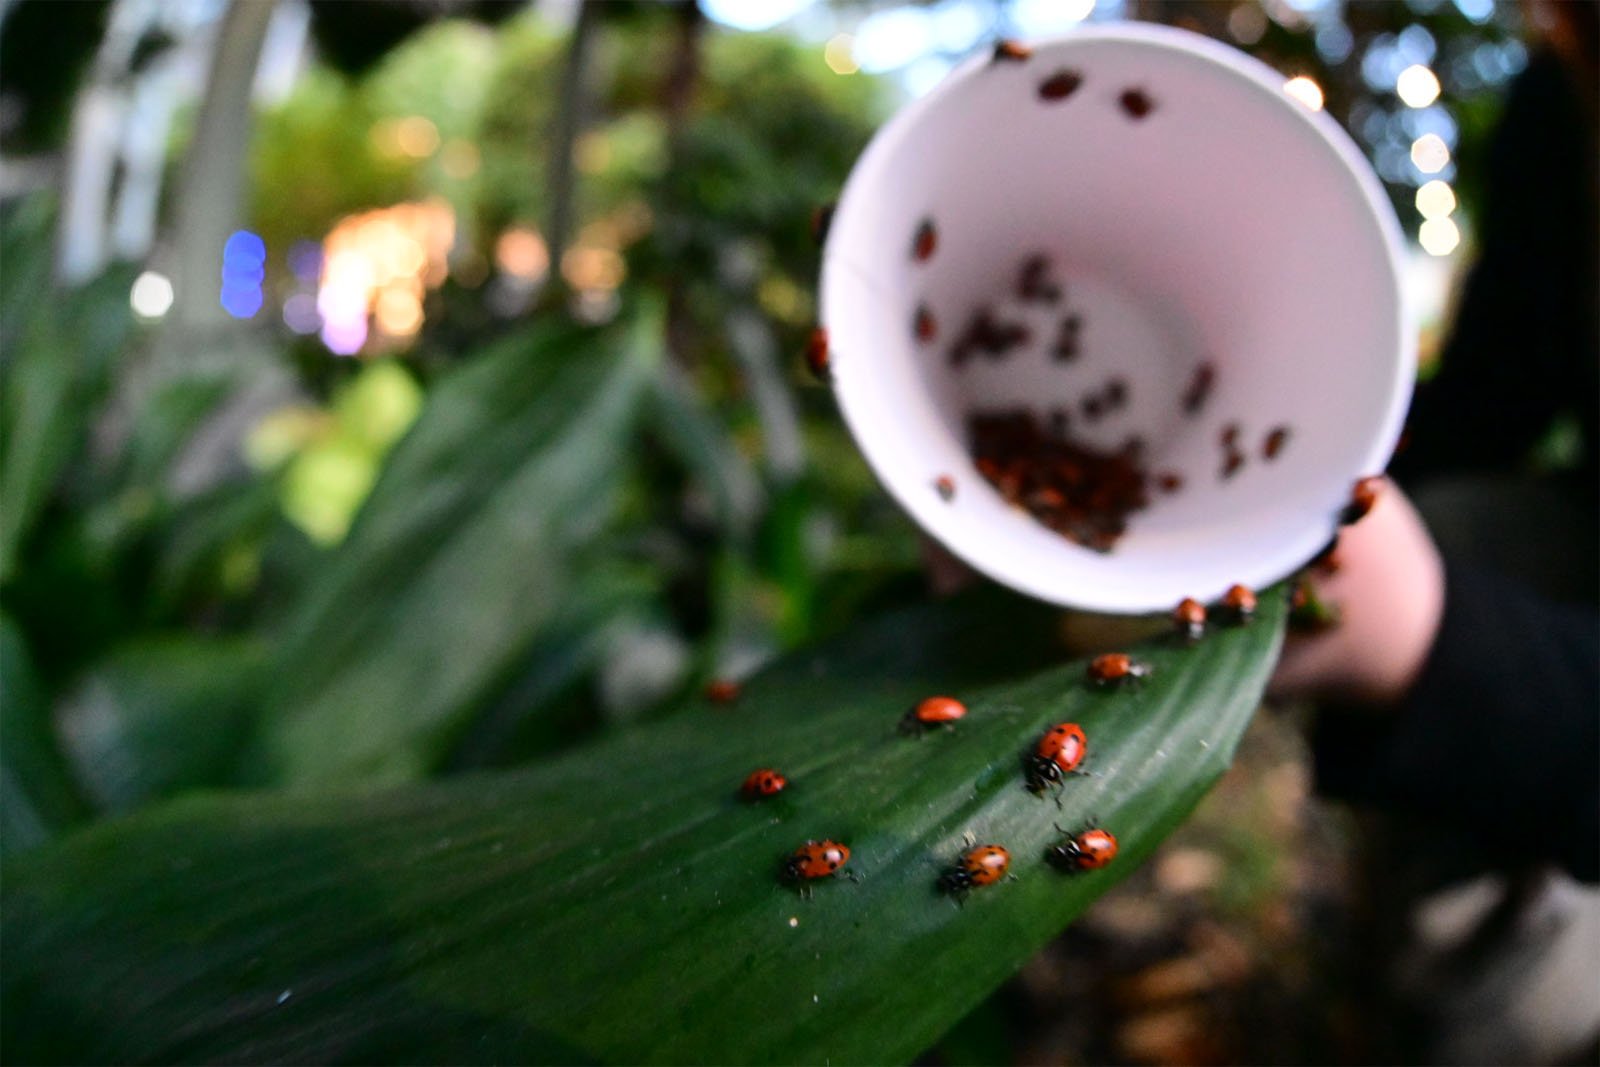 A hand tipping a cup with ladybugs onto a large green leaf, scattering the insects close-up in a lush, leafy environment.